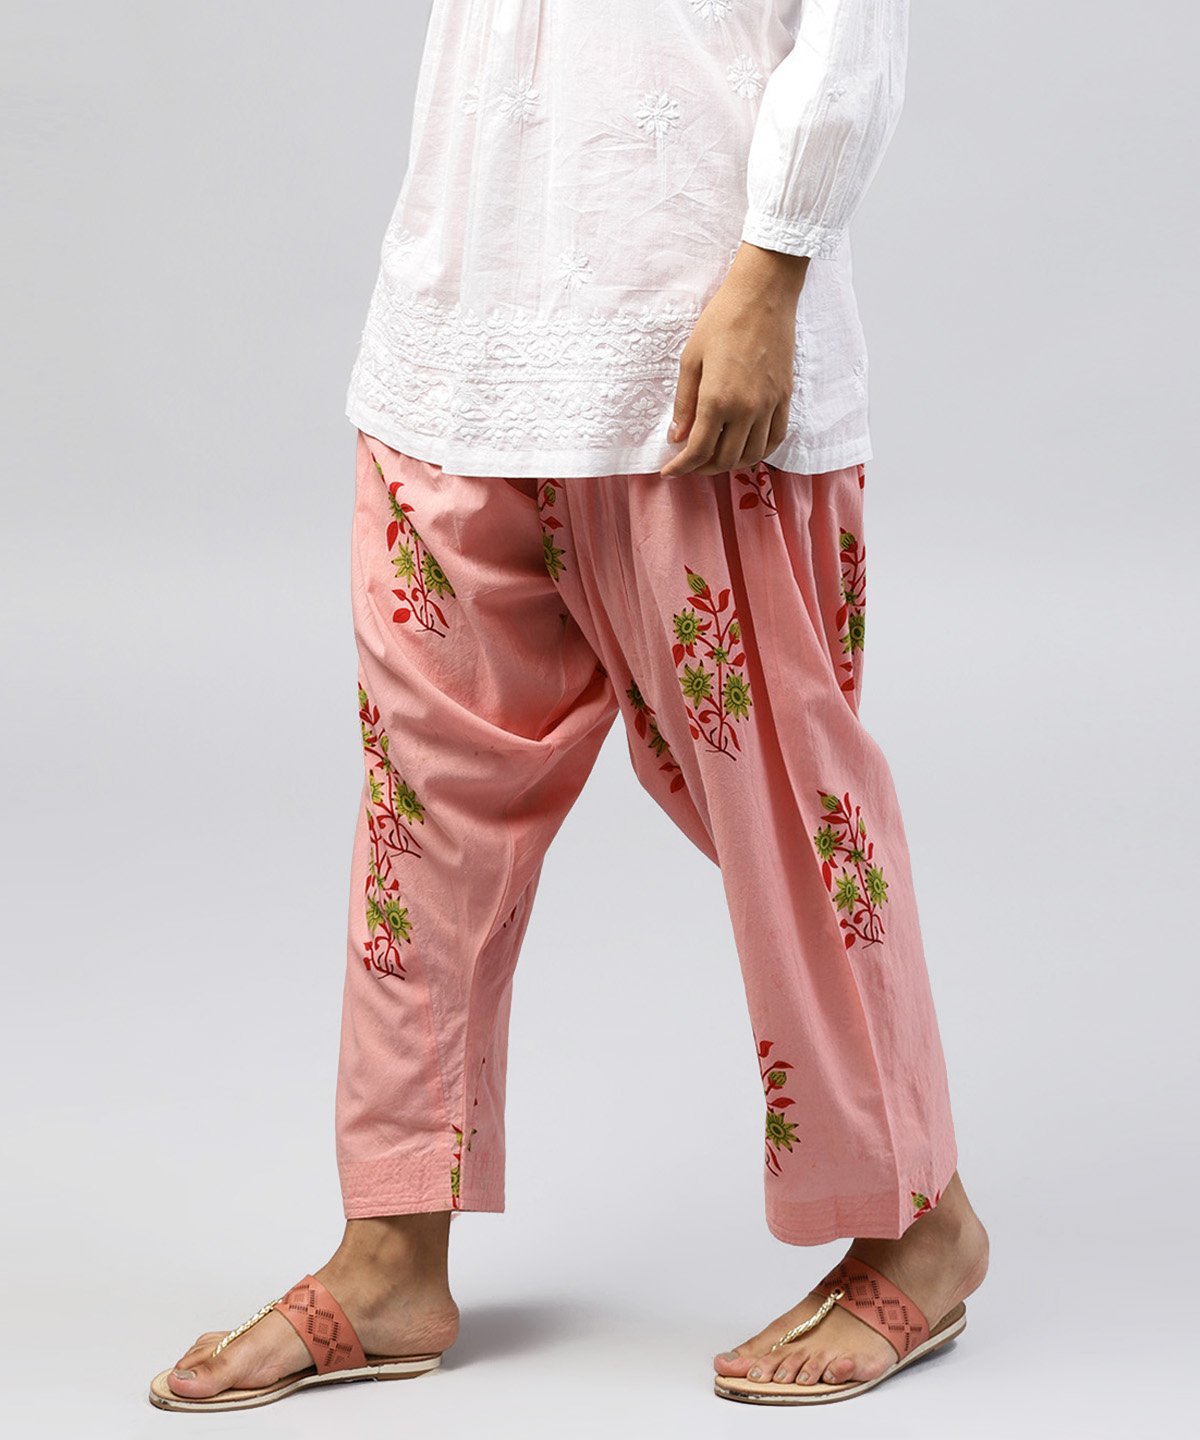 Buy best Women's peach printed cotton pants online at best prices